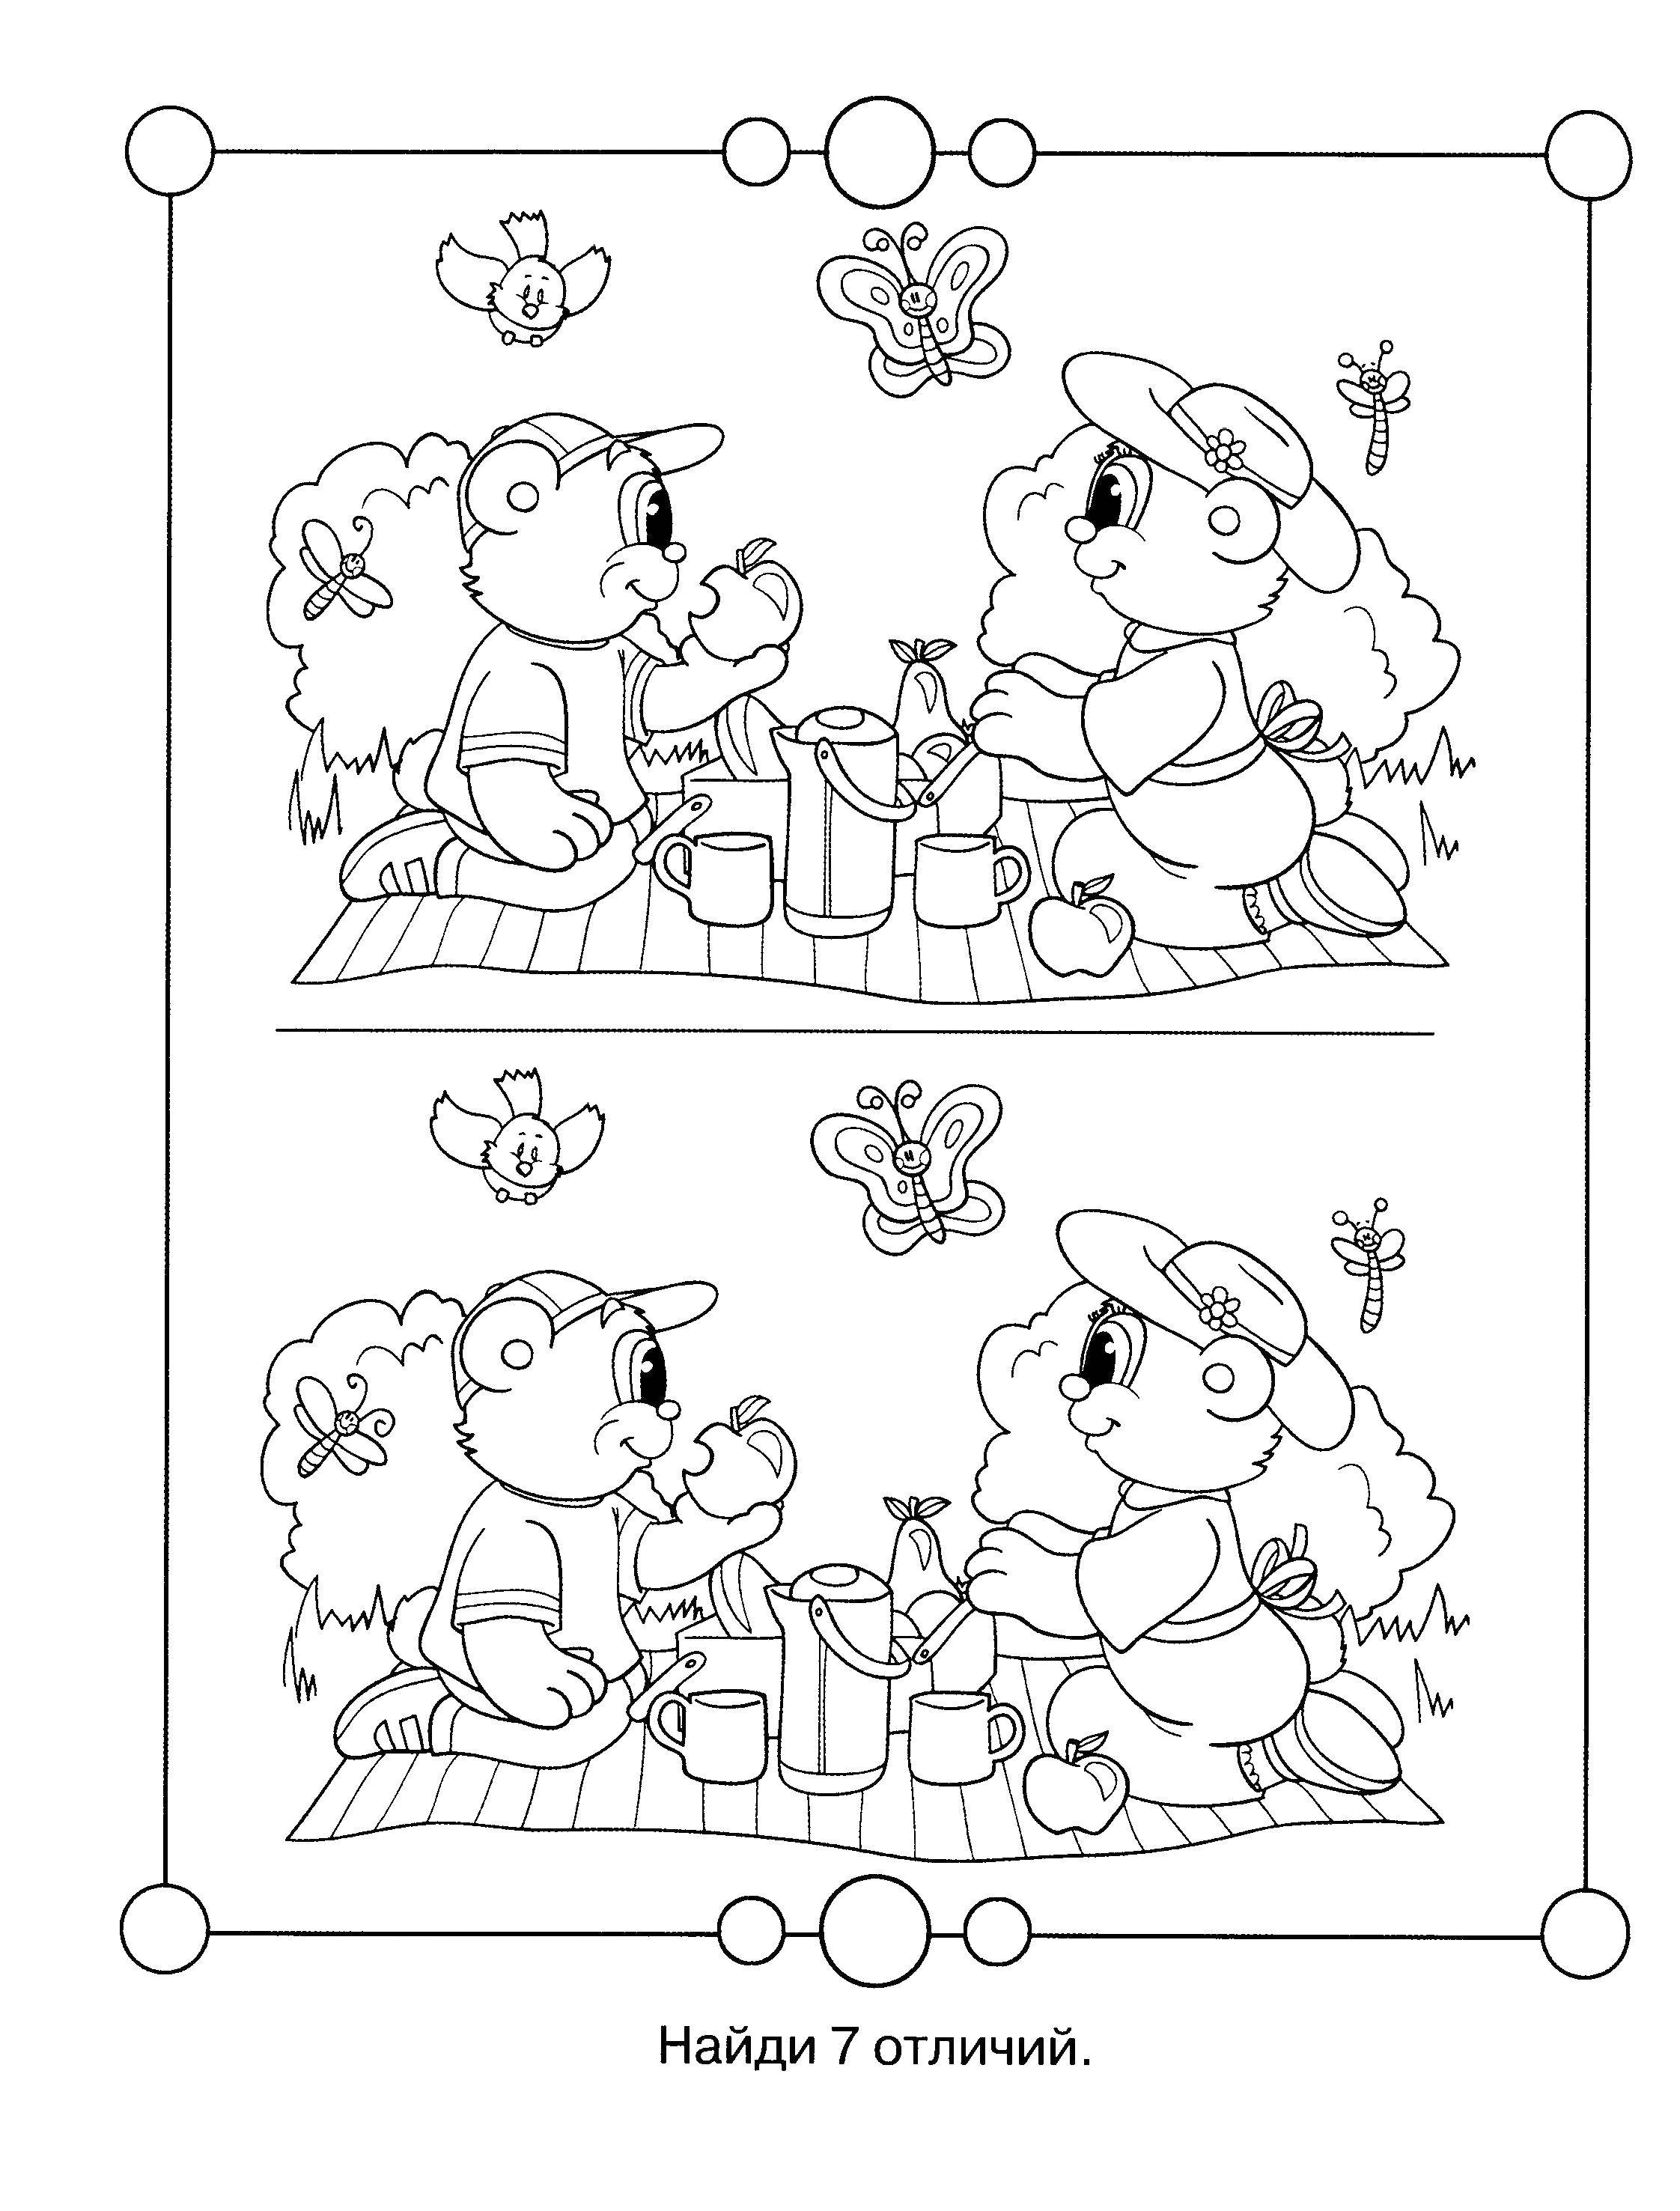 Coloring Find the differences. Category riddles for kids. Tags:  Teaching coloring, logic.